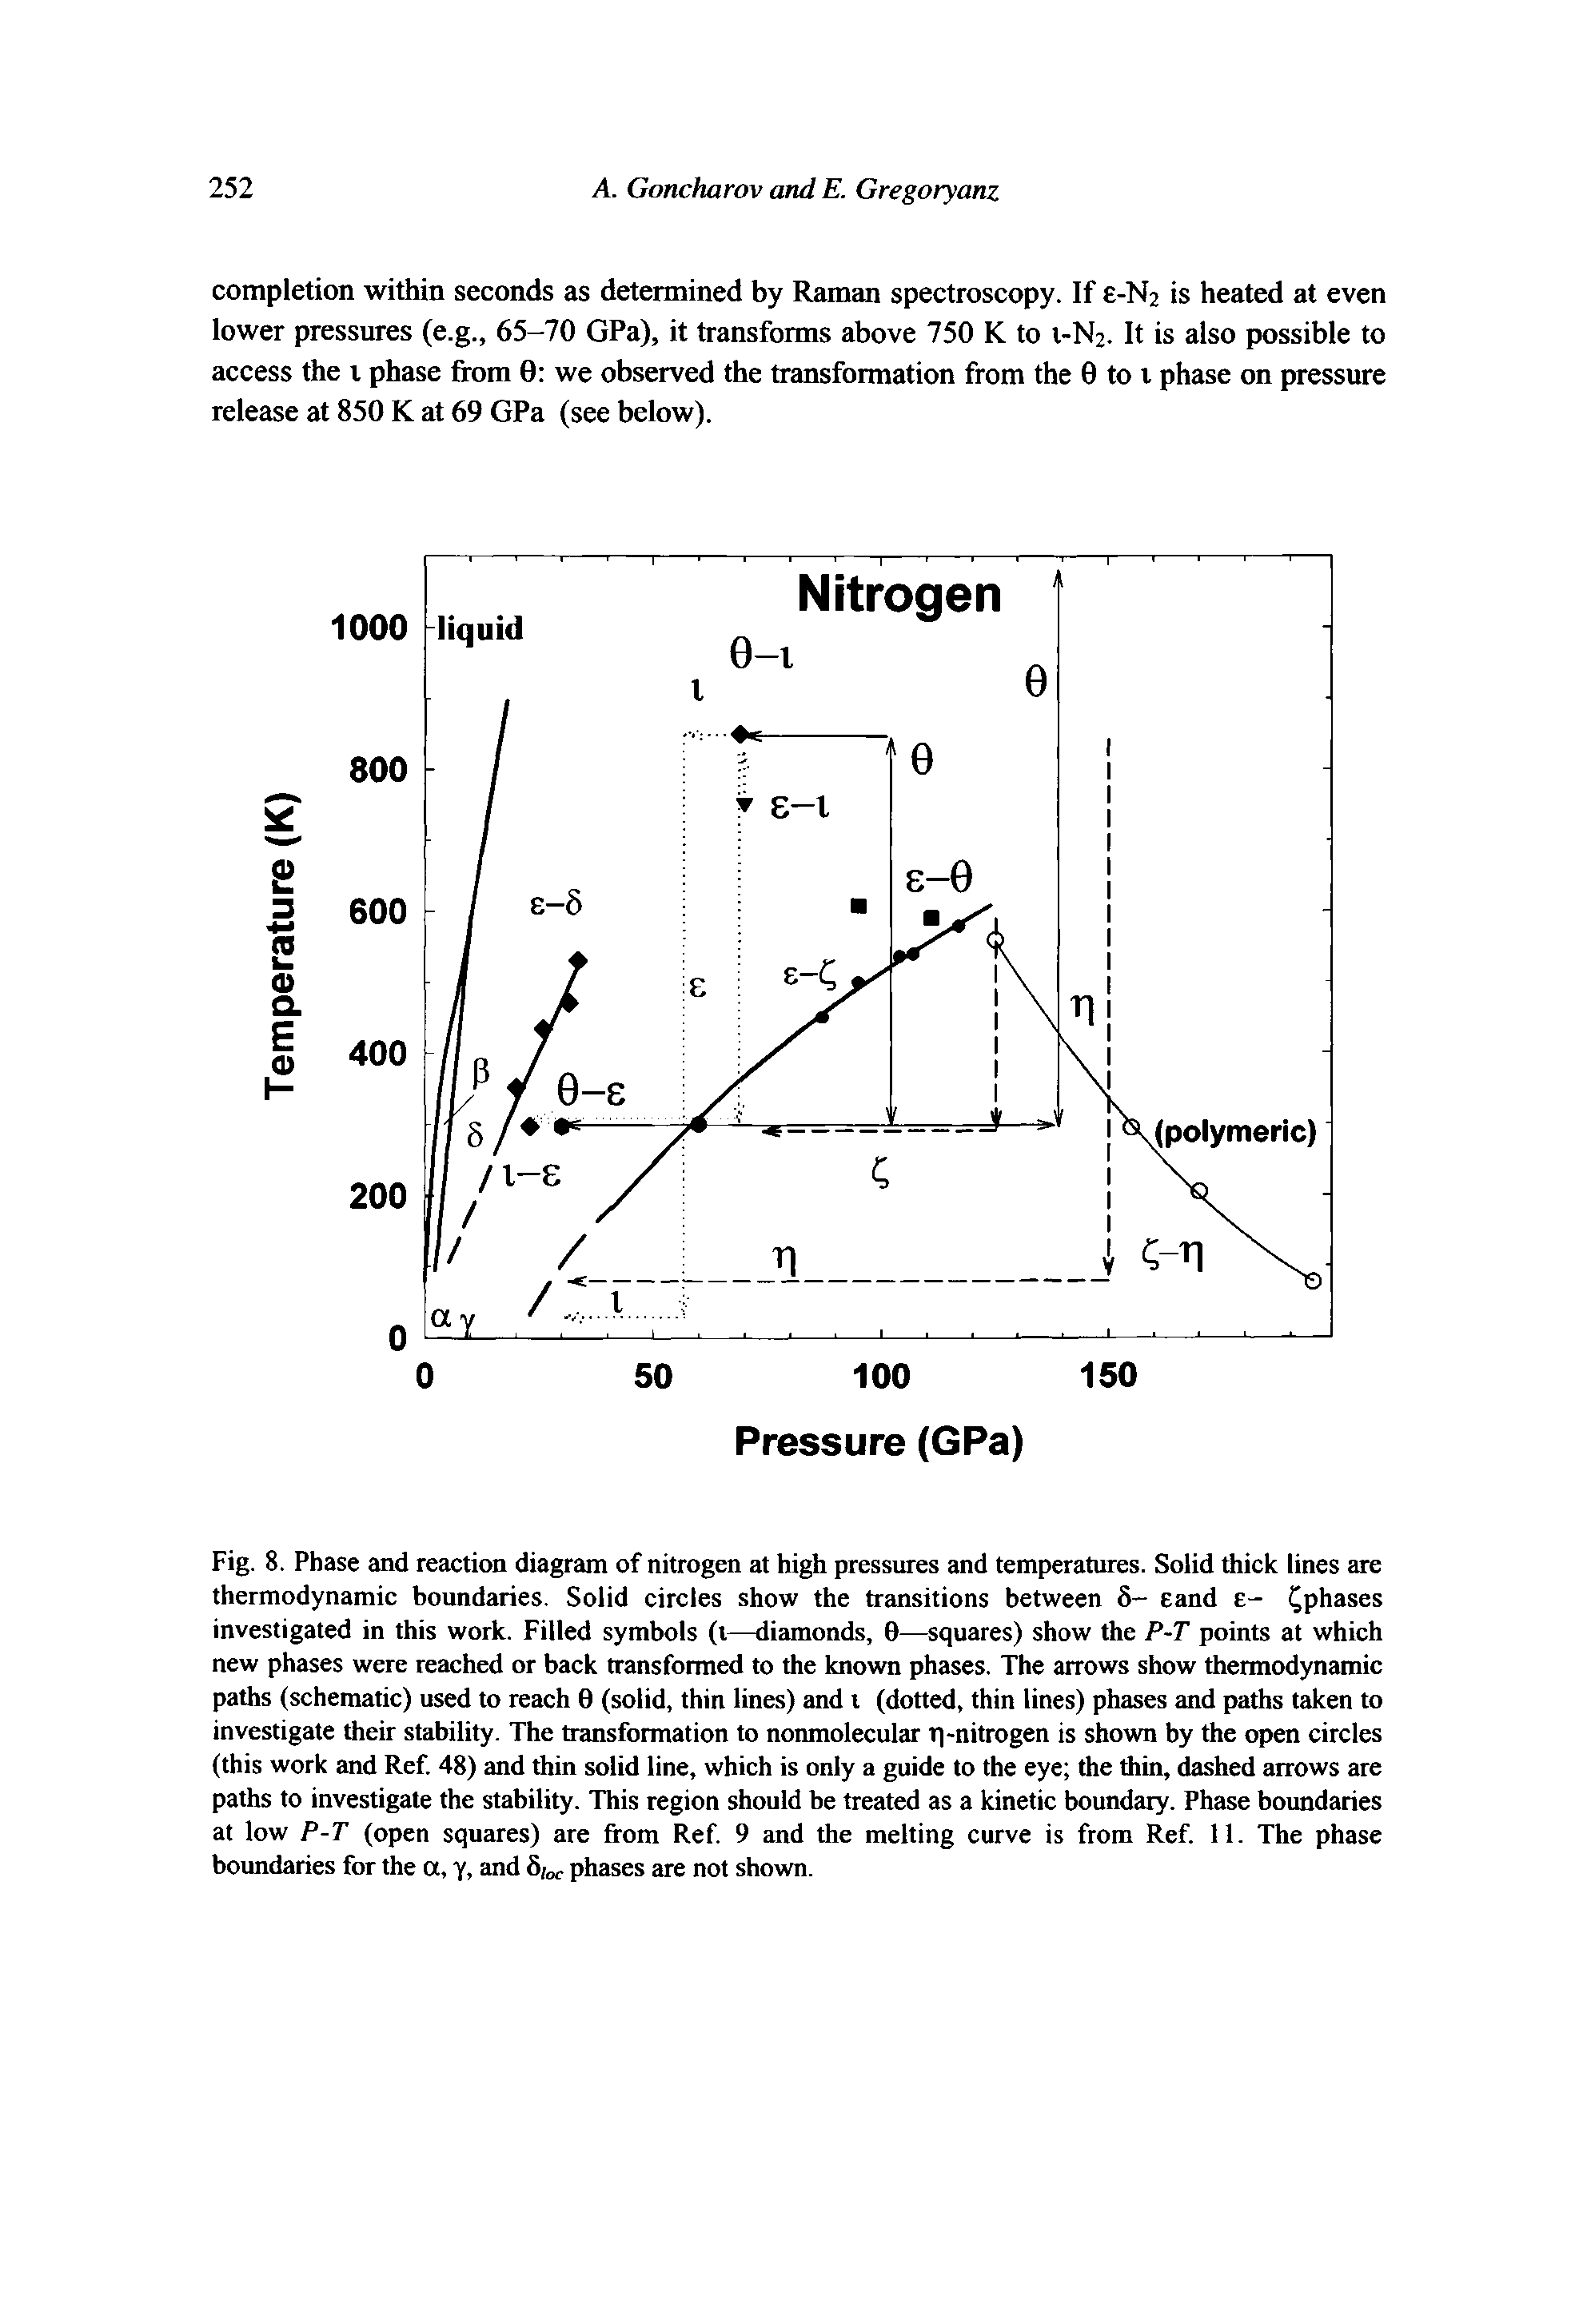 Fig. 8. Phase and reaction diagram of nitrogen at high pressures and temperatures. Solid thick lines are thermodynamic boundaries. Solid circles show the transitions between 5- eand e- phases investigated in this work. Filled symbols (i—diamonds, 0—squares) show the P-T points at which new phases were reached or back transformed to the known phases. The arrows show thermodynamic paths (schematic) used to reach 0 (solid, thin lines) and i (dotted, thin lines) phases and paths taken to investigate their stability. The transformation to nonmolecular r -nitrogen is shown by the open circles (this work and Ref 48) and thin solid line, which is only a guide to the eye the thin, dashed arrows are paths to investigate the stability. This region should be treated as a kinetic boundary. Phase boundaries at low P-T (open squares) are from Ref 9 and the melting curve is from Ref. 11. The phase boundaries for the a, y, and >i c phases are not shown.